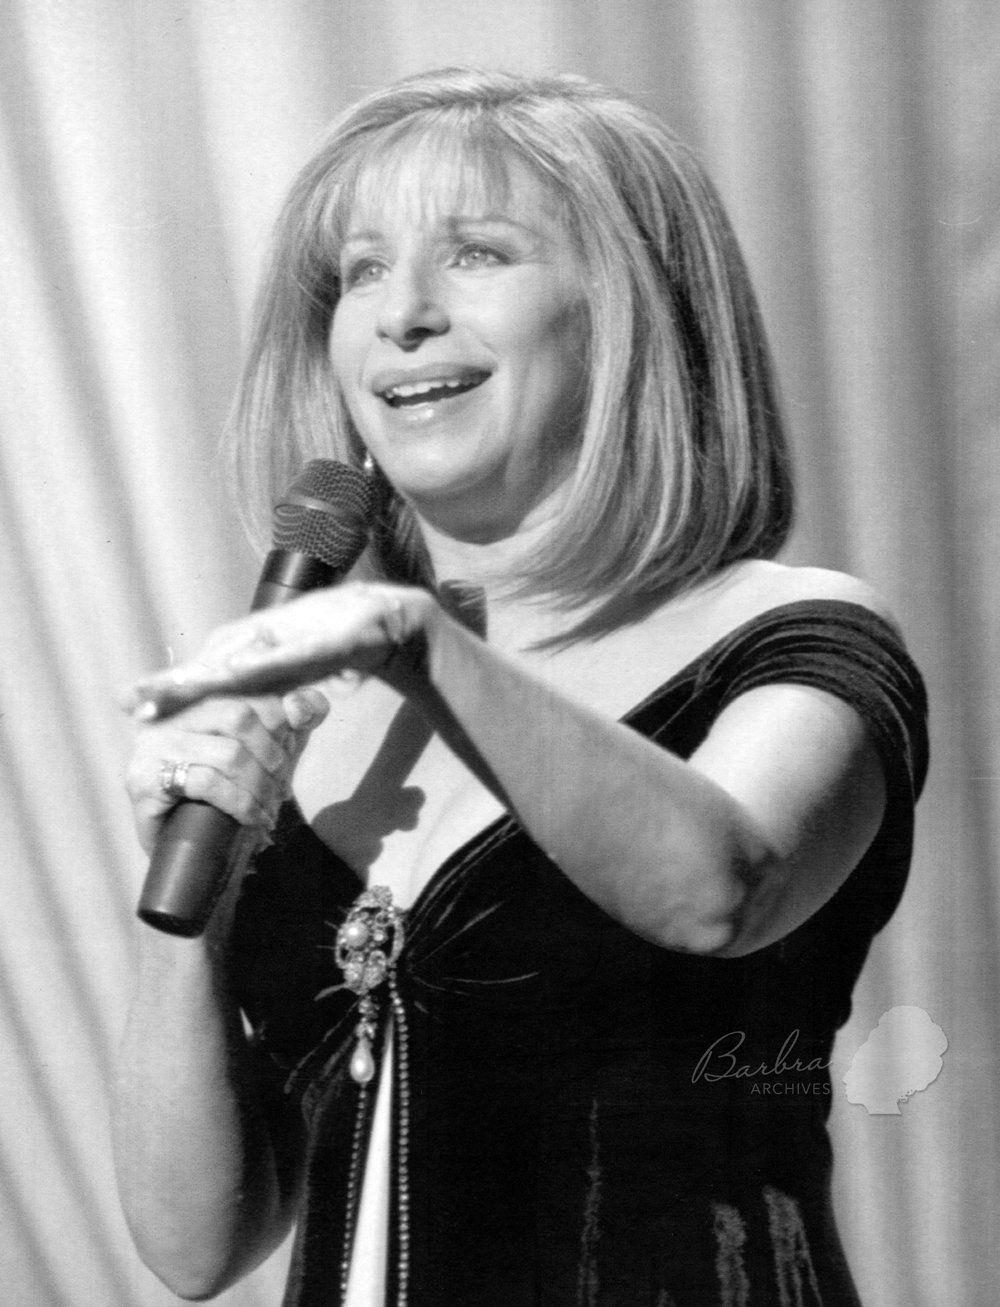 May 10, 1994 ... Barbra Streisand waves to a sold out crowd at USAir Area in Landover, Md. to start her tour of the United States. Streisand is on the first stop of her five city tour, her first in 28 years. Photo by: Carlos Osorio.)